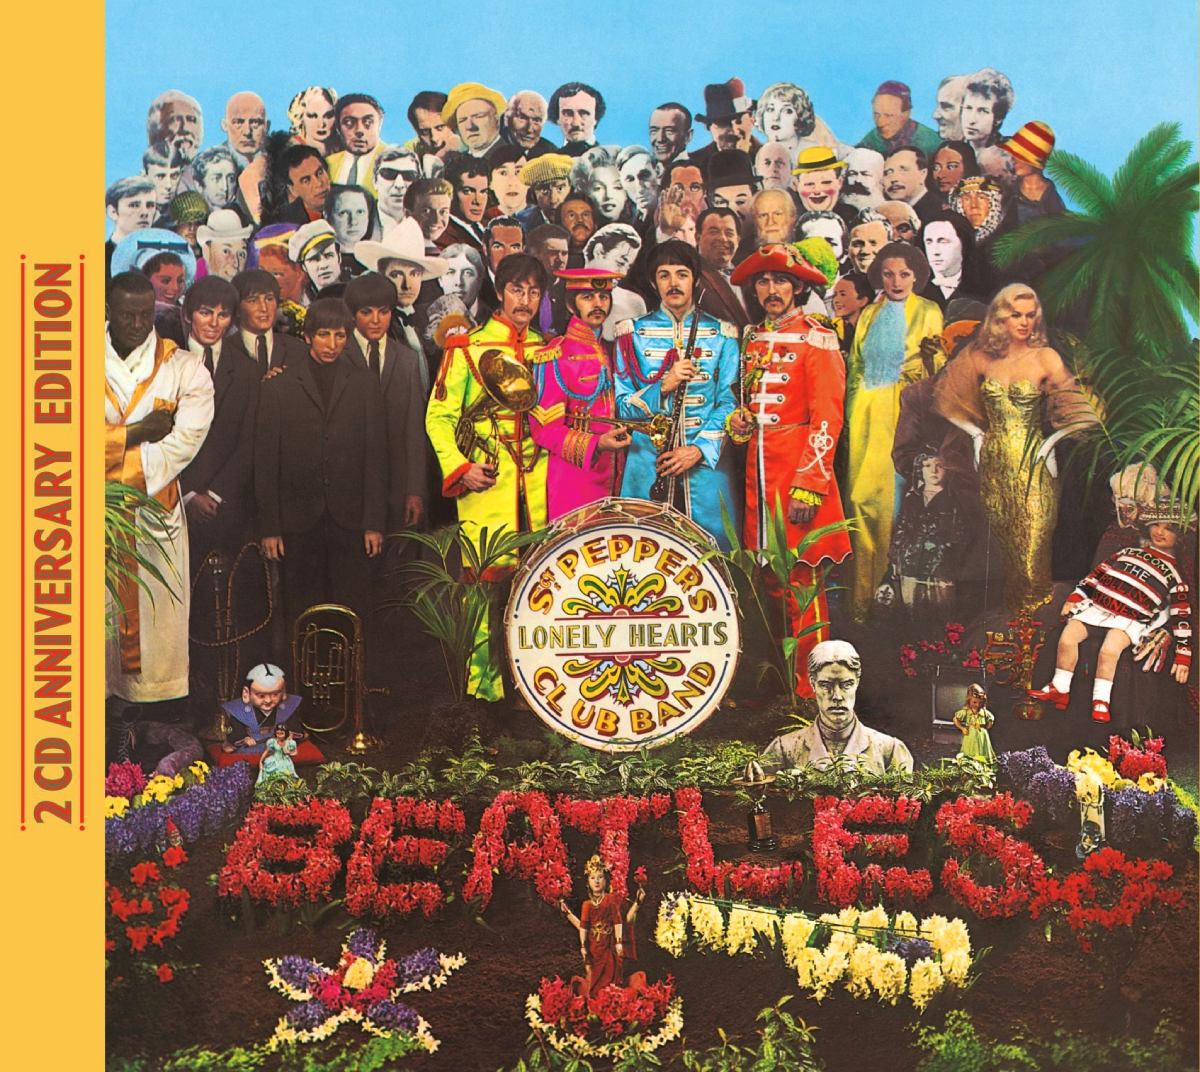 Sgt. Pepper's Lonely Hearts Club Band (альбом Битлз)